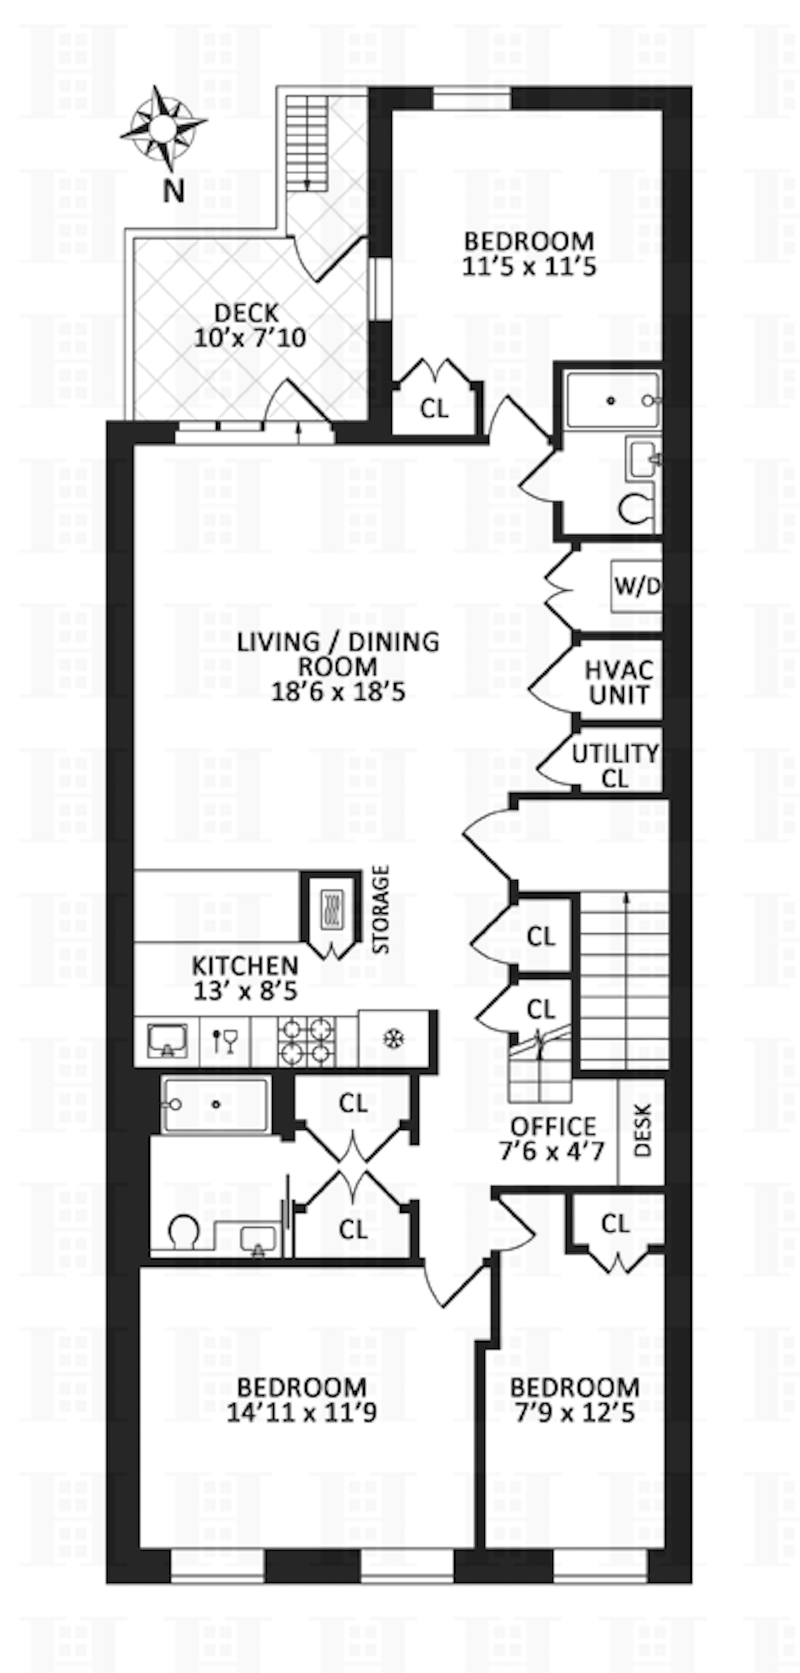 Floorplan for 132 2nd Place, 5